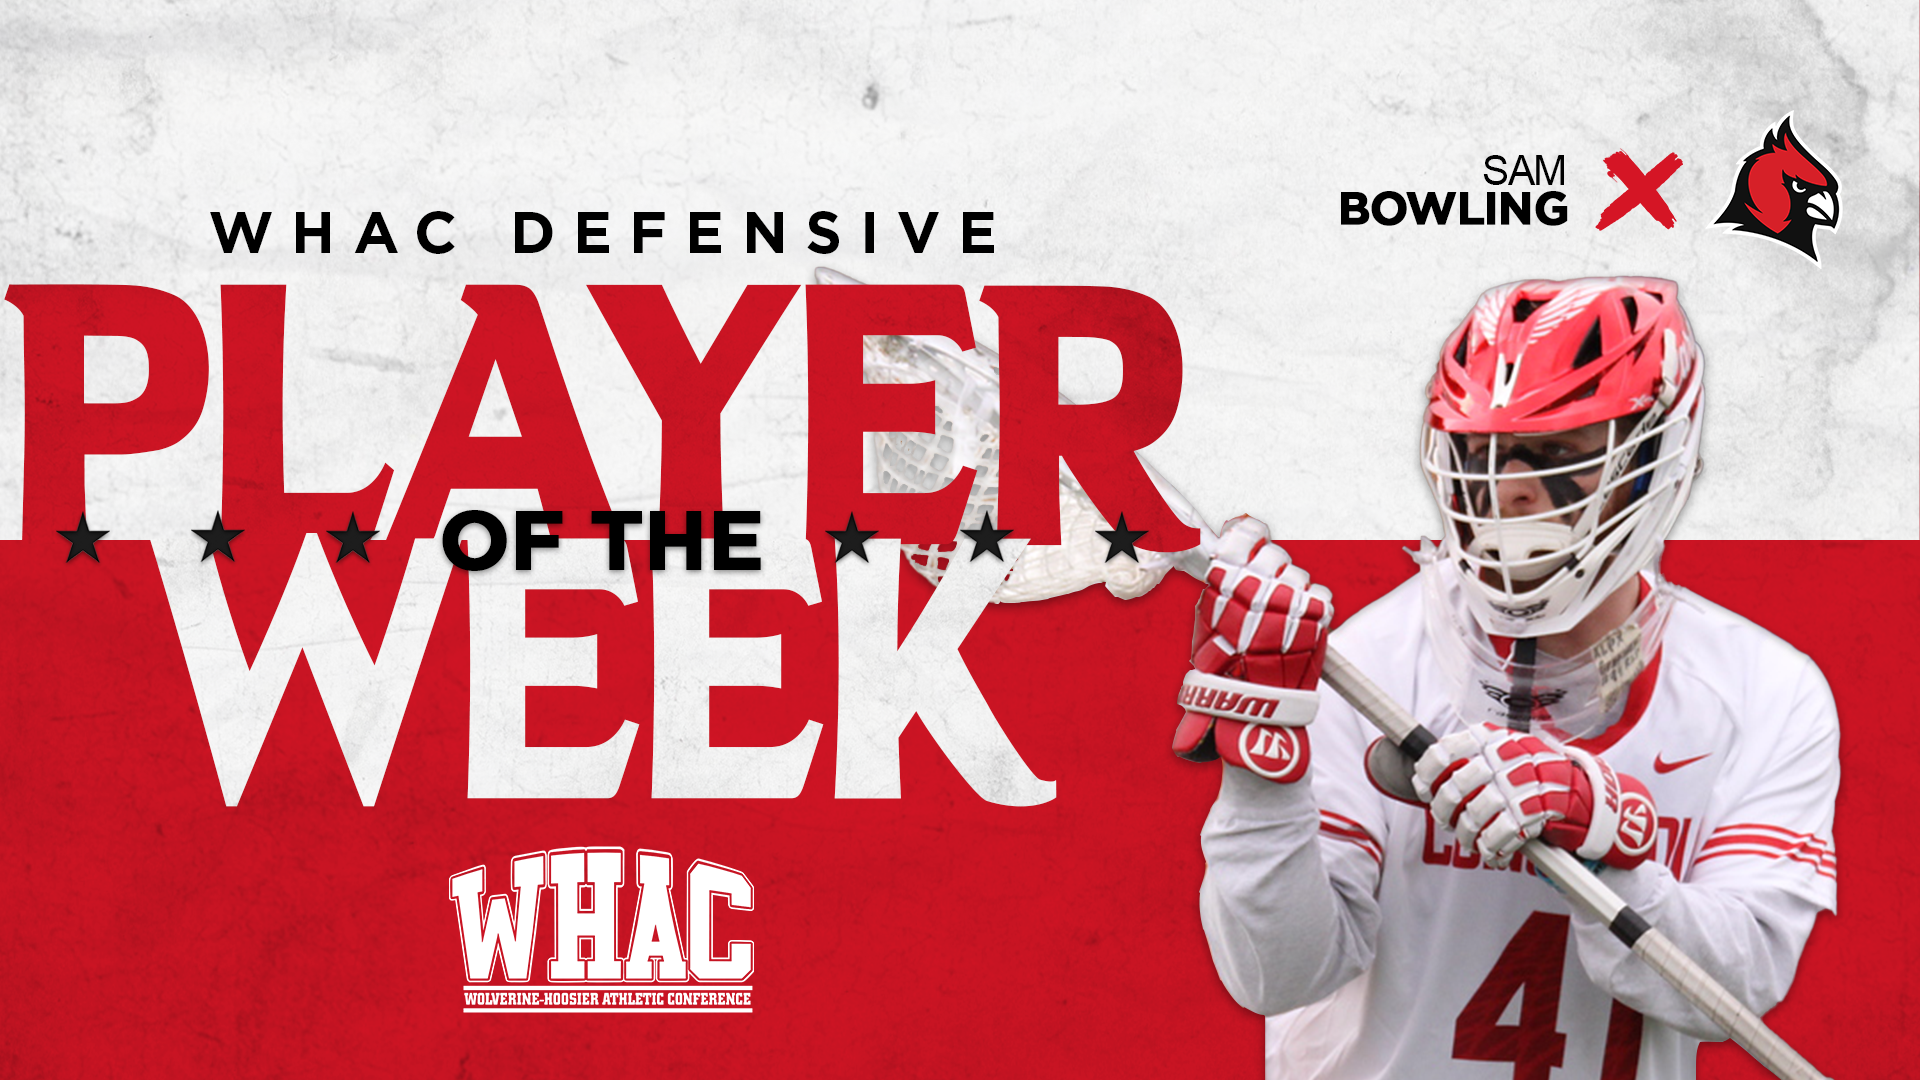 Men's Lacrosse's Bowling repeats as WHAC Defensive Player of the Week